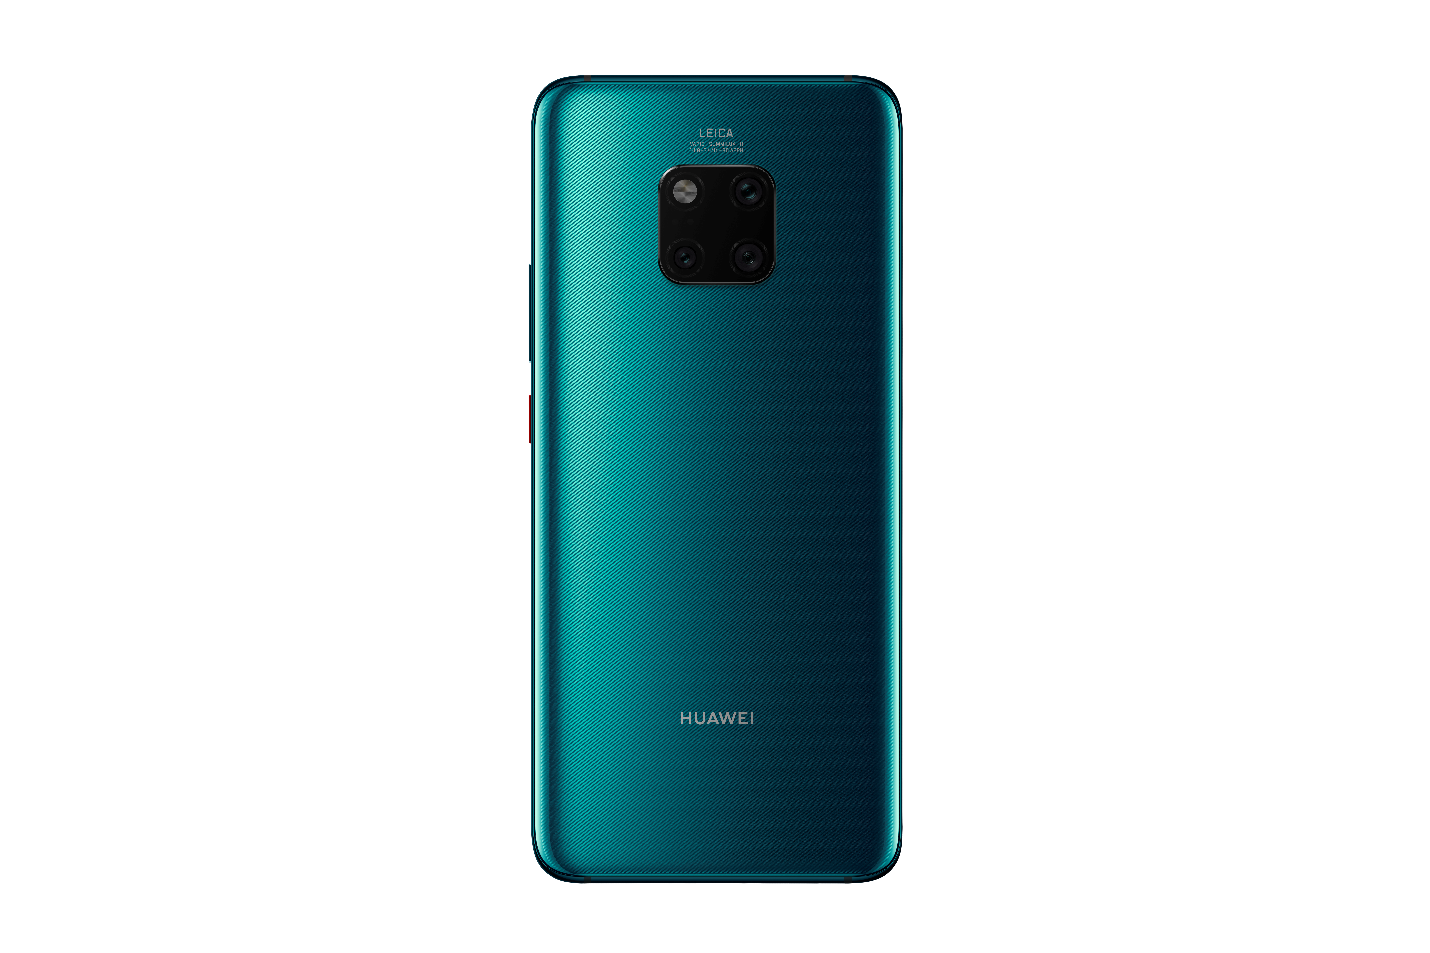 MATE 20 PRO NOW BACK IN STOCK ACROSS QATAR